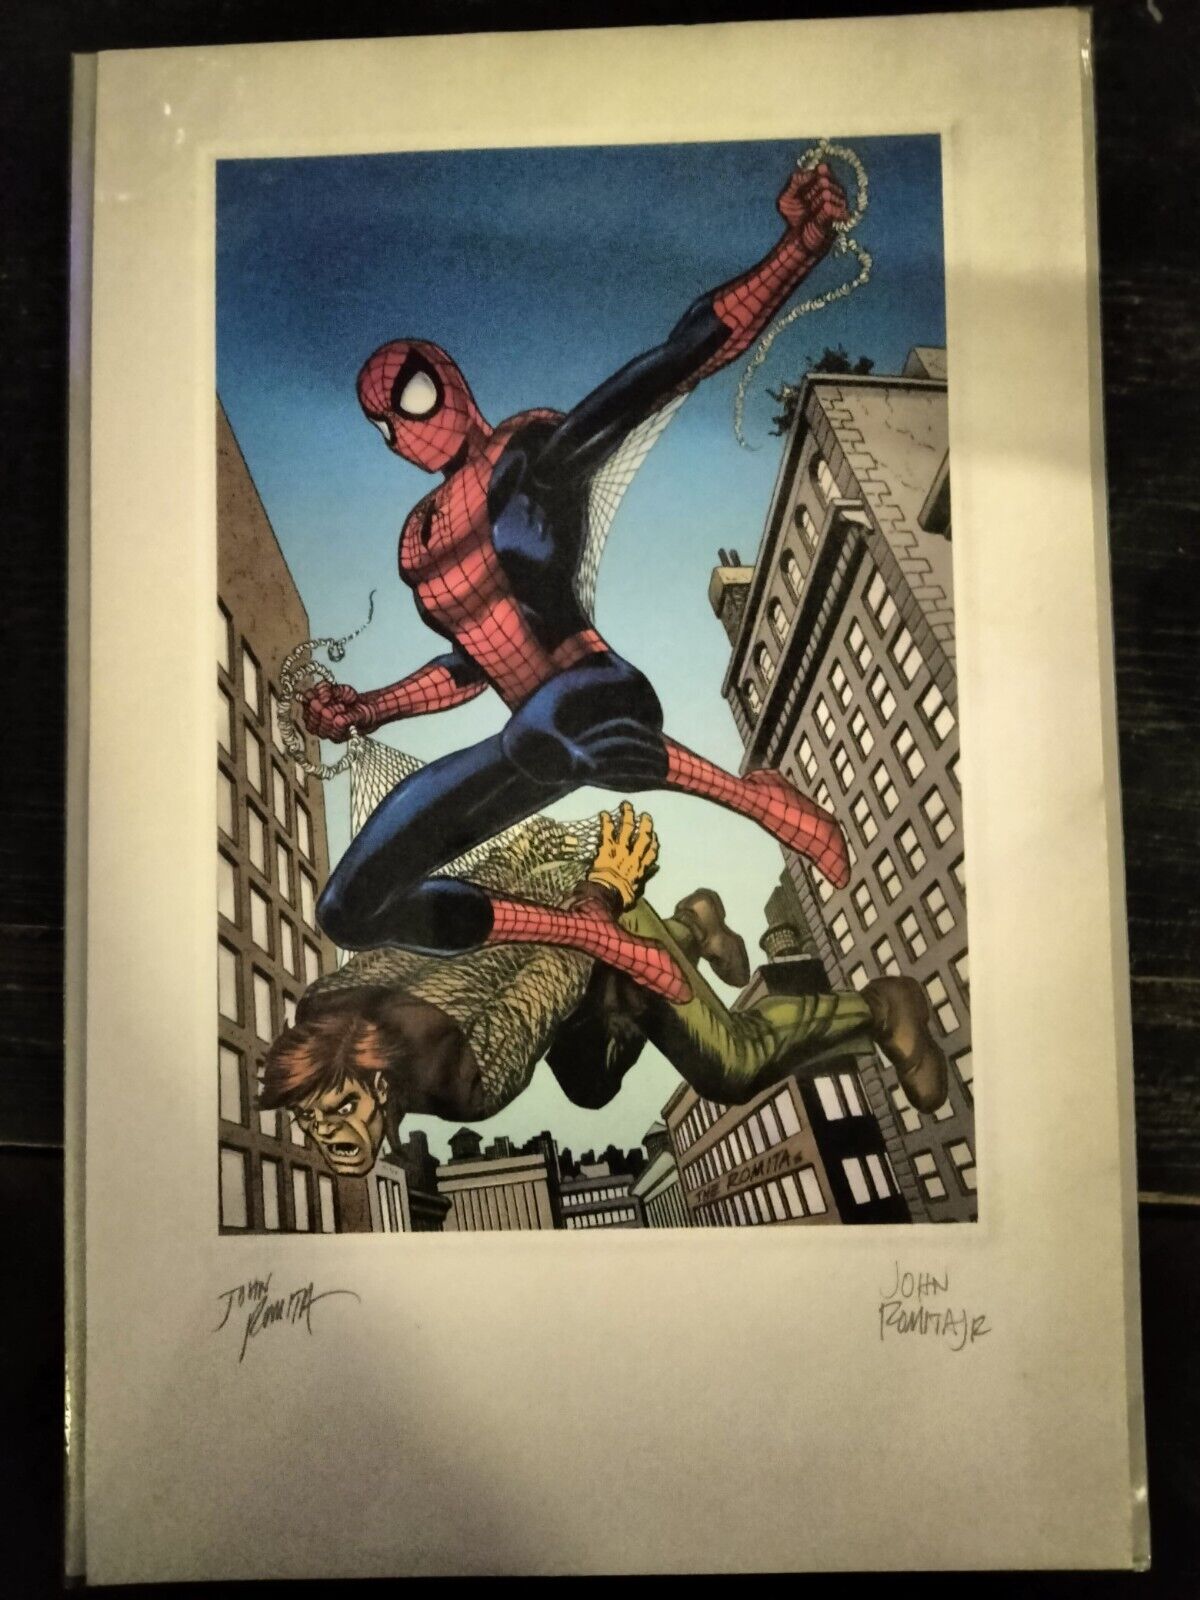 Spiderman With Great Power Comes Great Responsibility 2002 Signed Print